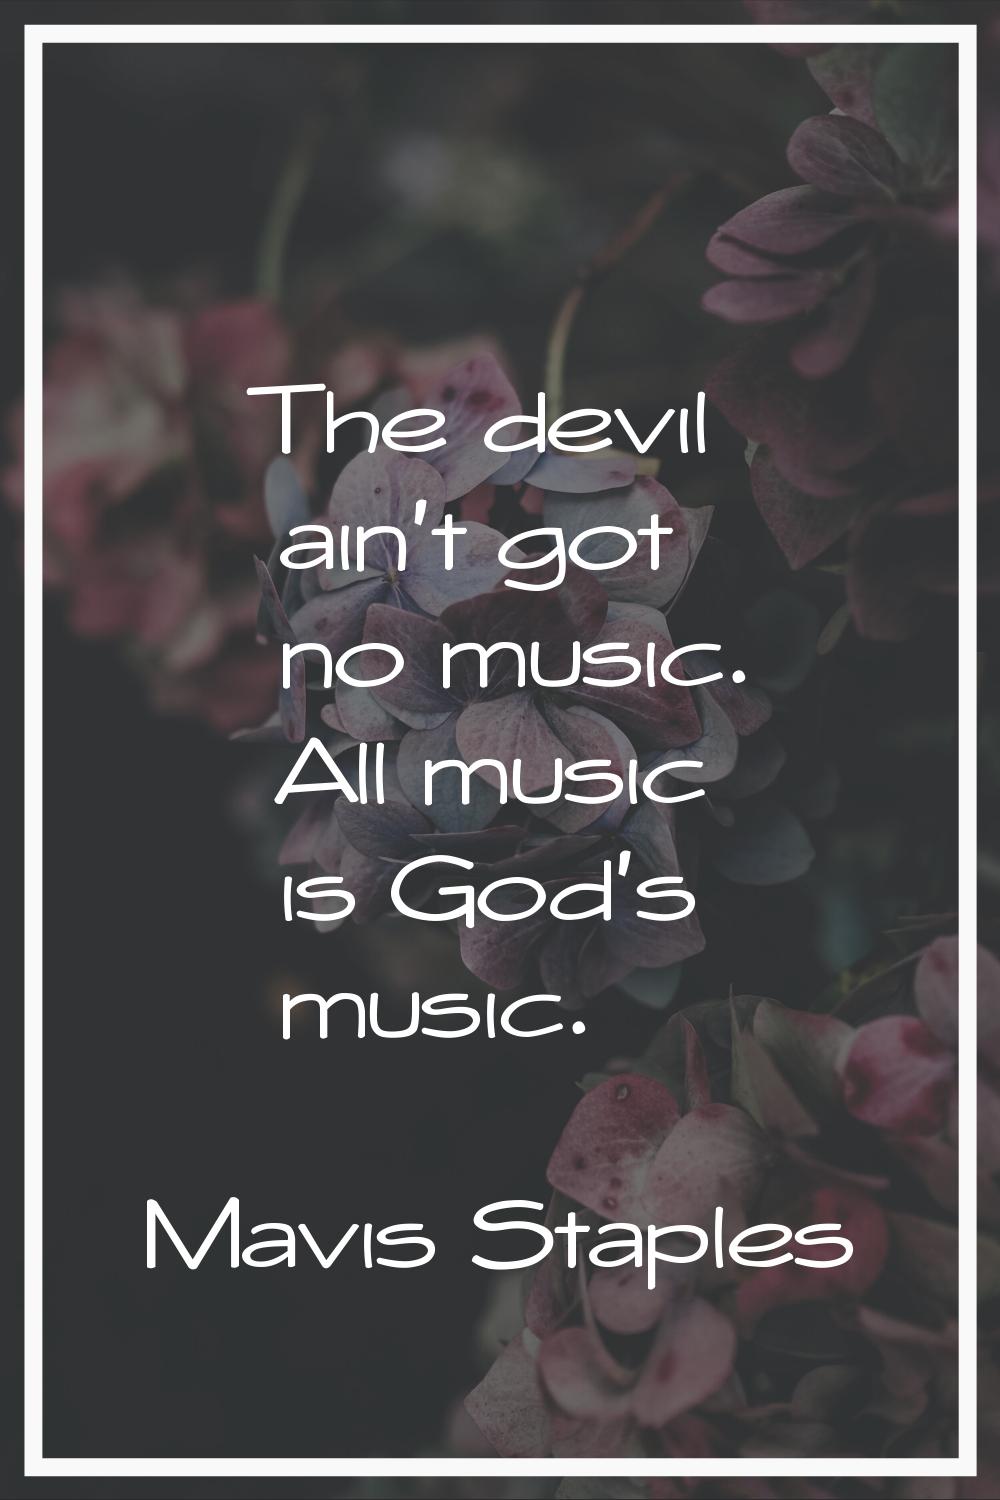 The devil ain't got no music. All music is God's music.